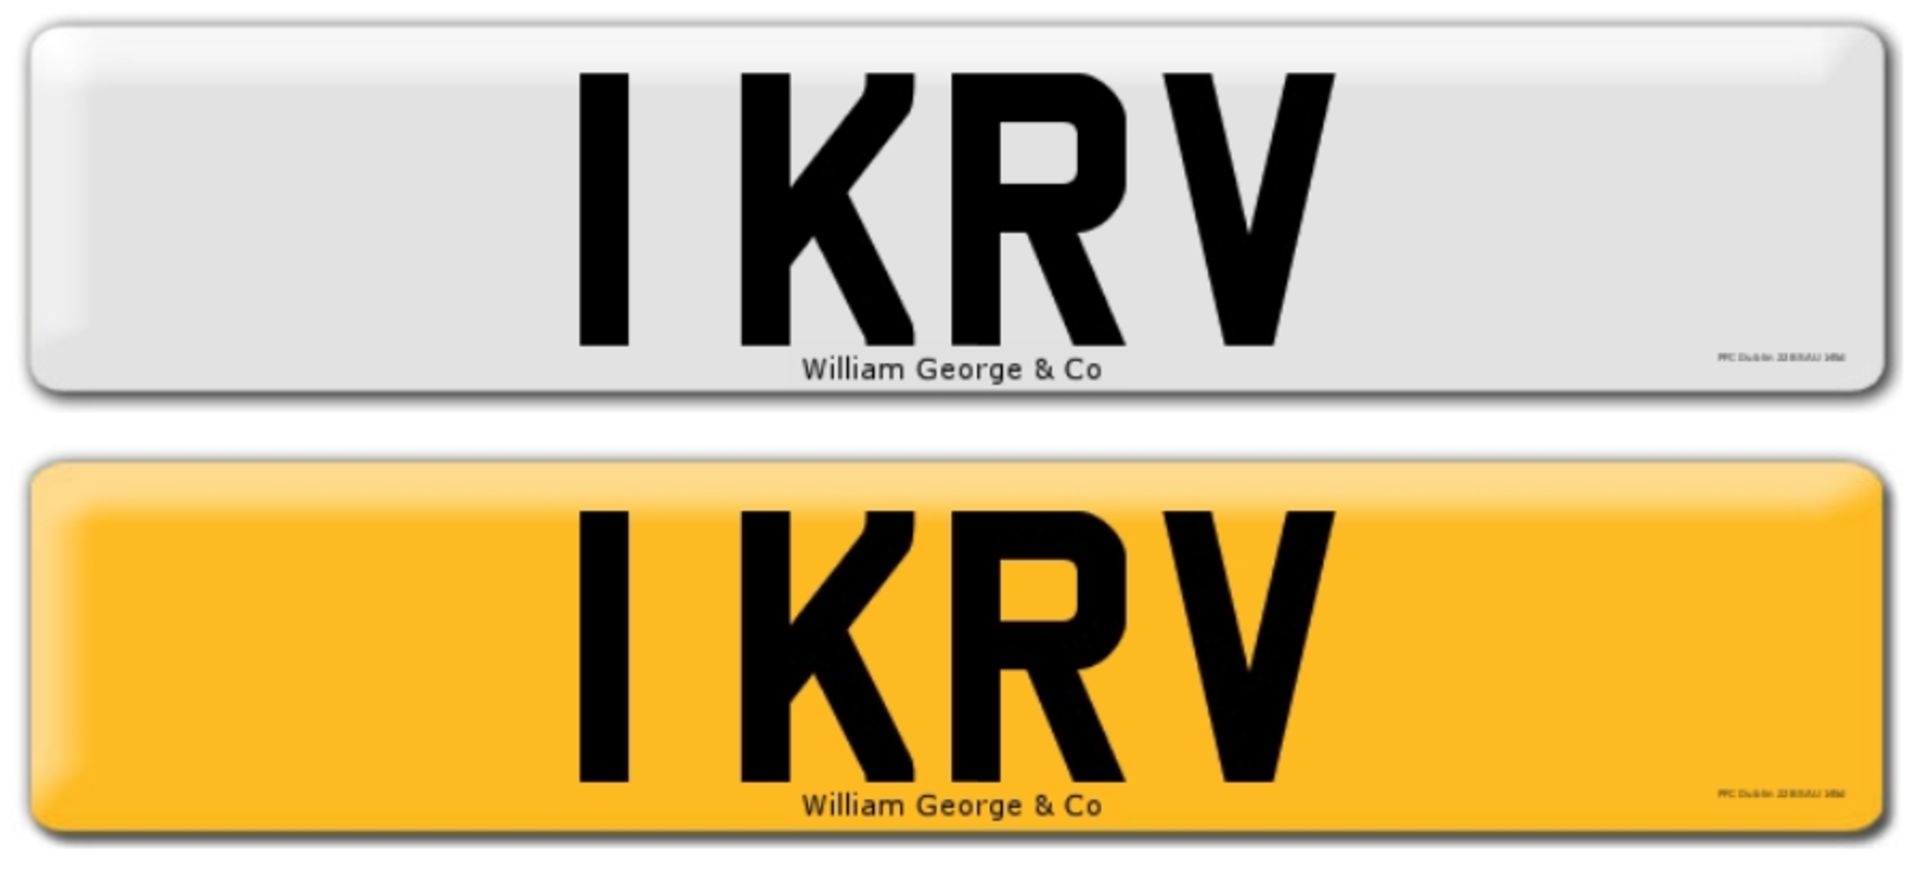 Registration on DVLA retention certificate, ready to transfer 1 KRV, This number plate /